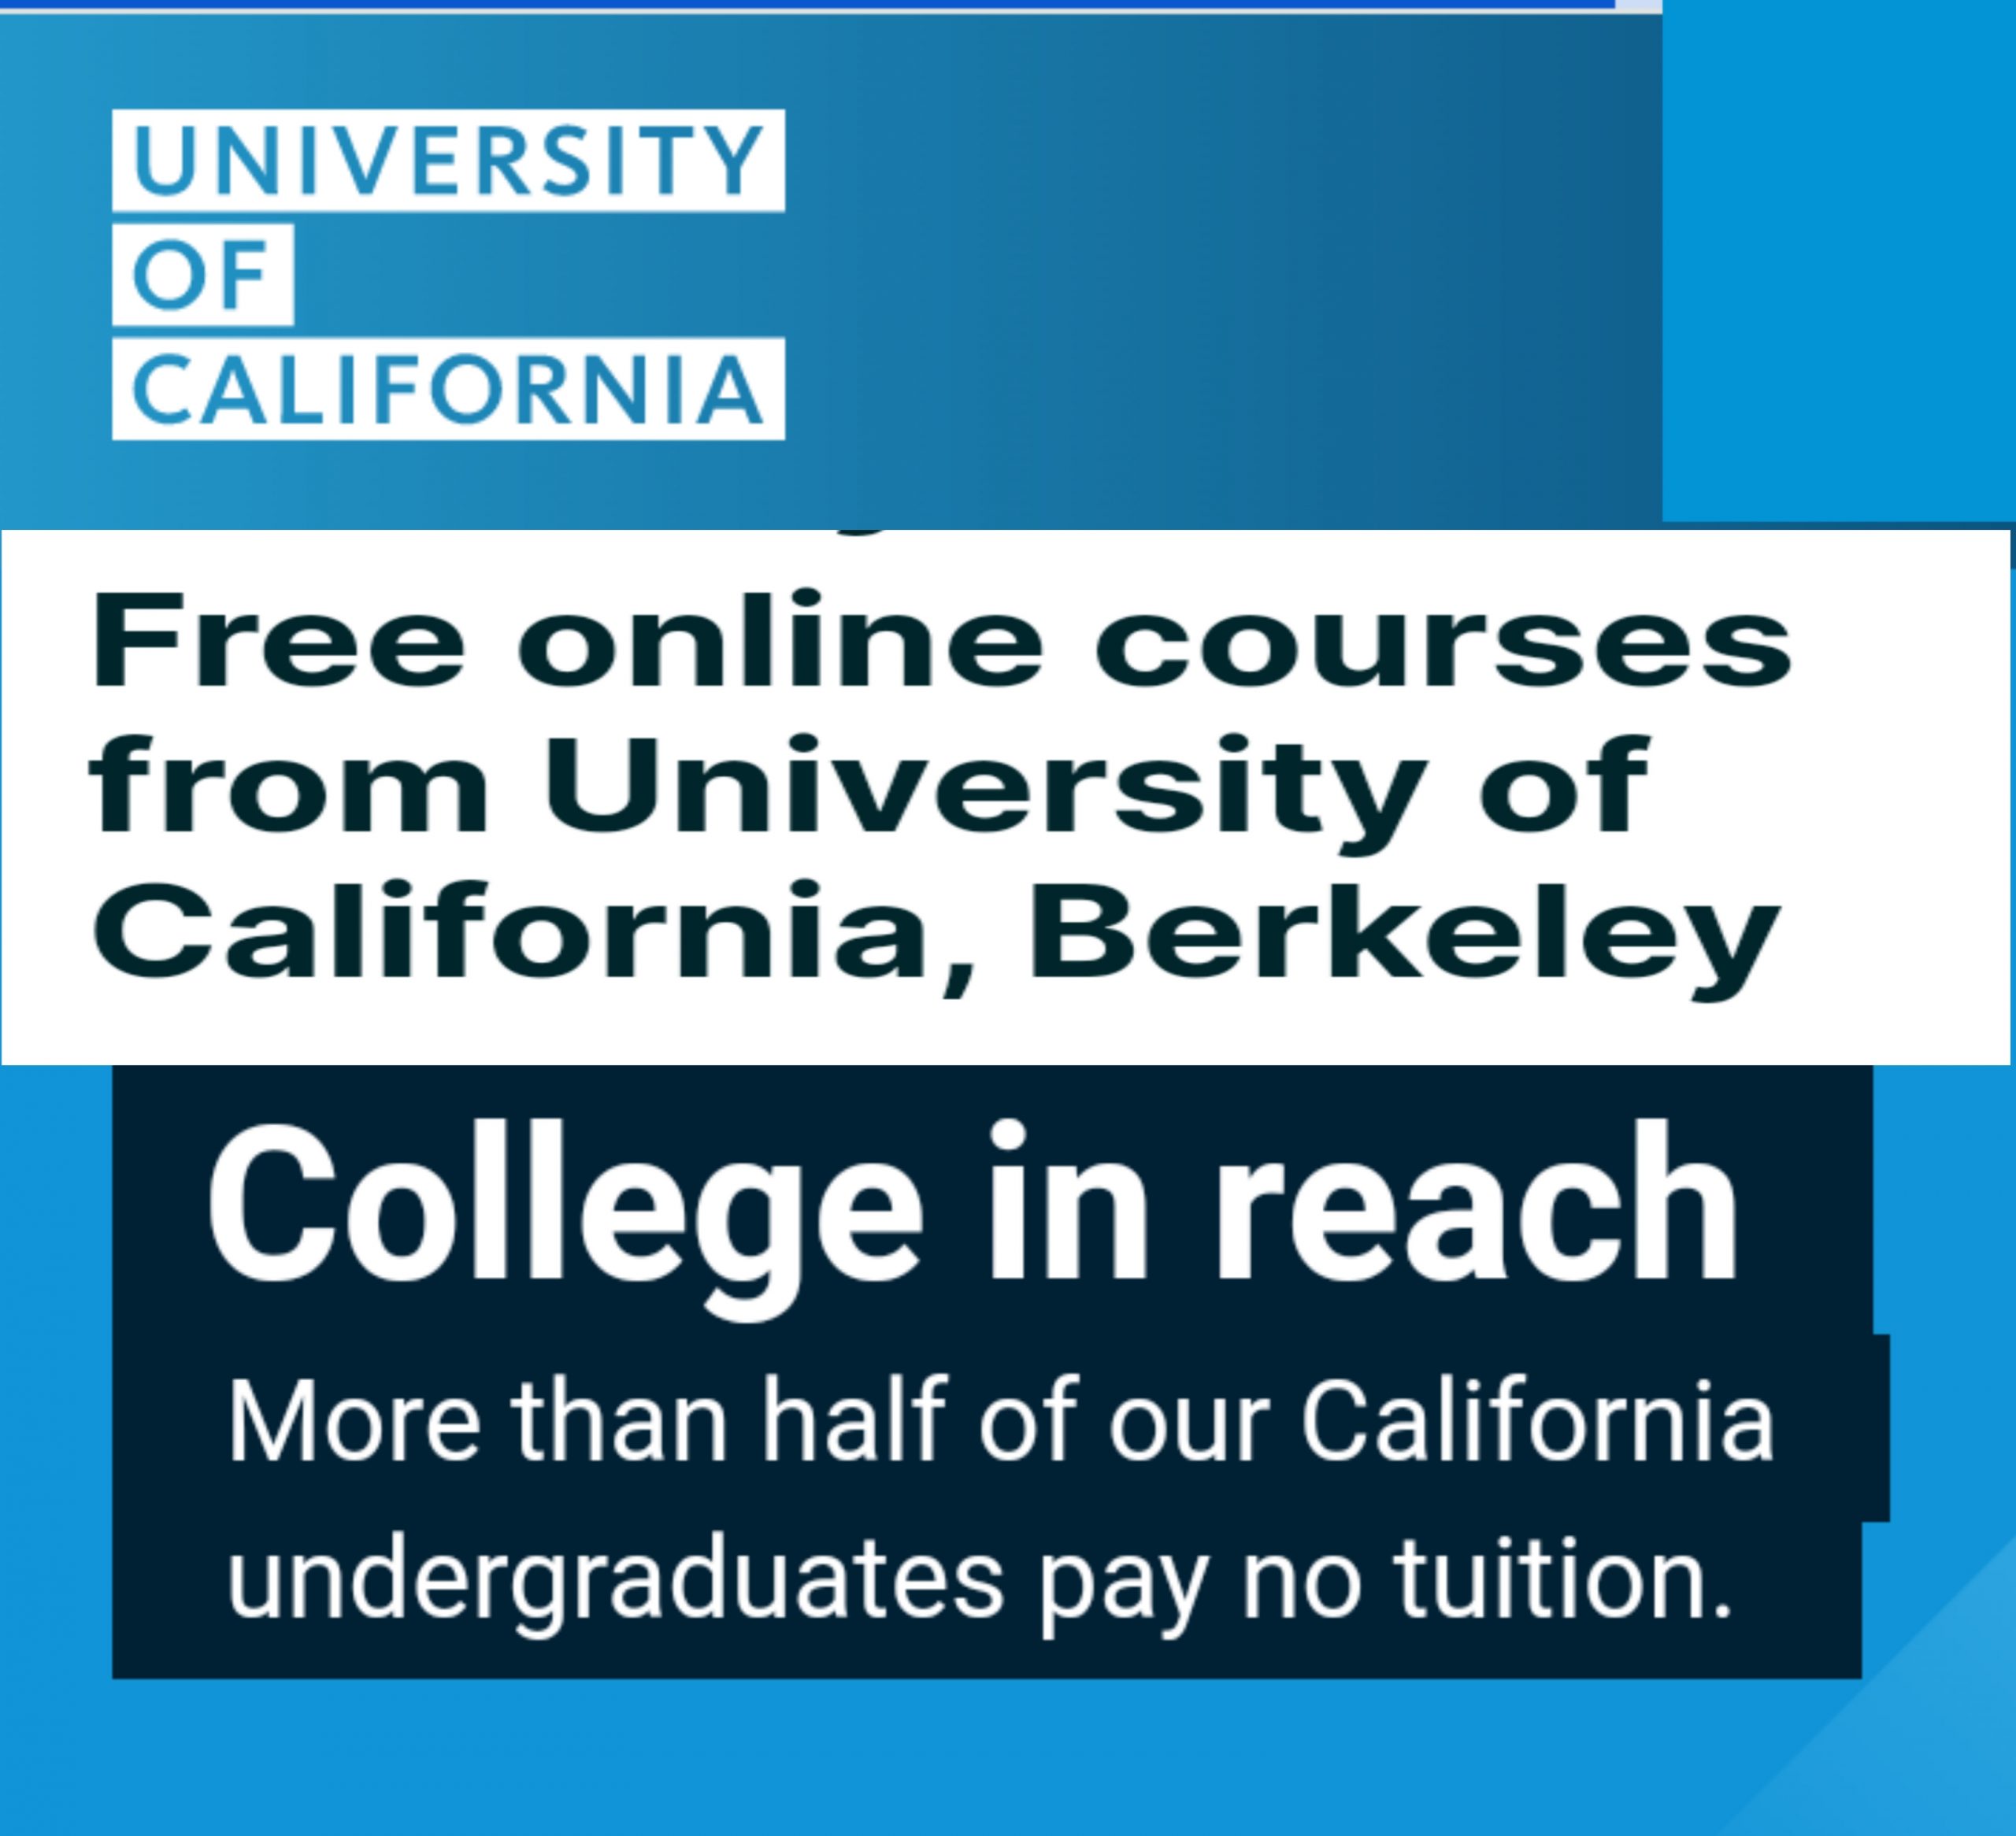 20220920 162915 scaled - University of California Free Online Courses and Certificates (100 percent Free and online)